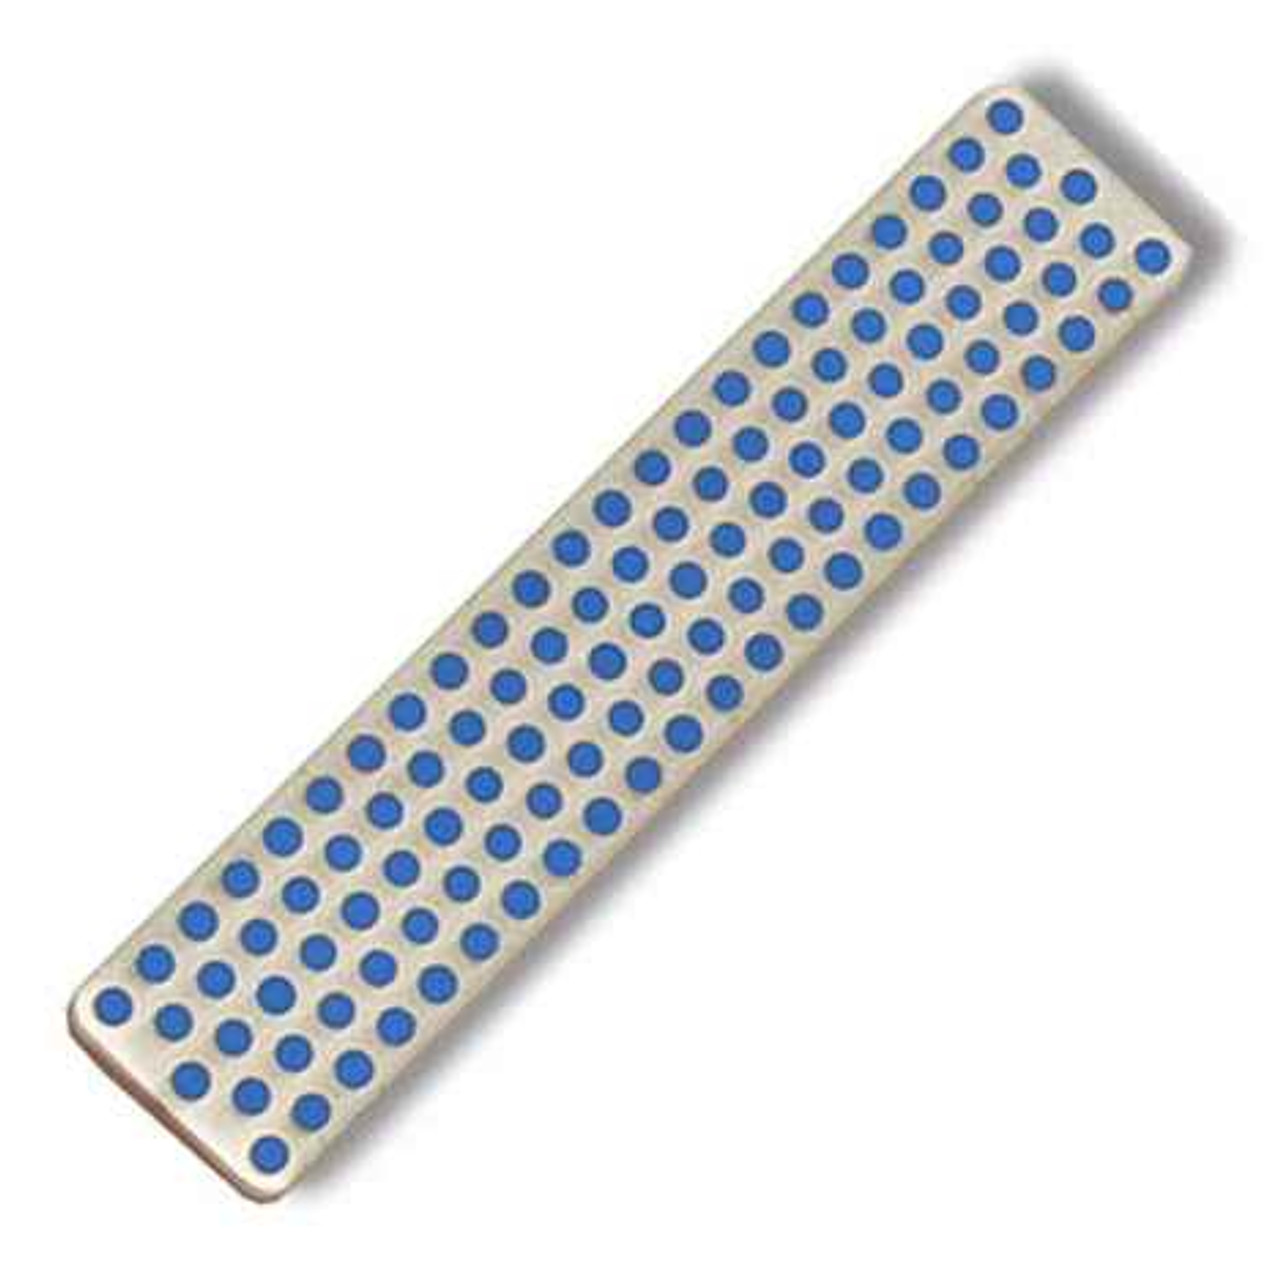 DMT 4" Replacement Diamond Whetstone for use w/Aligner, Coarse